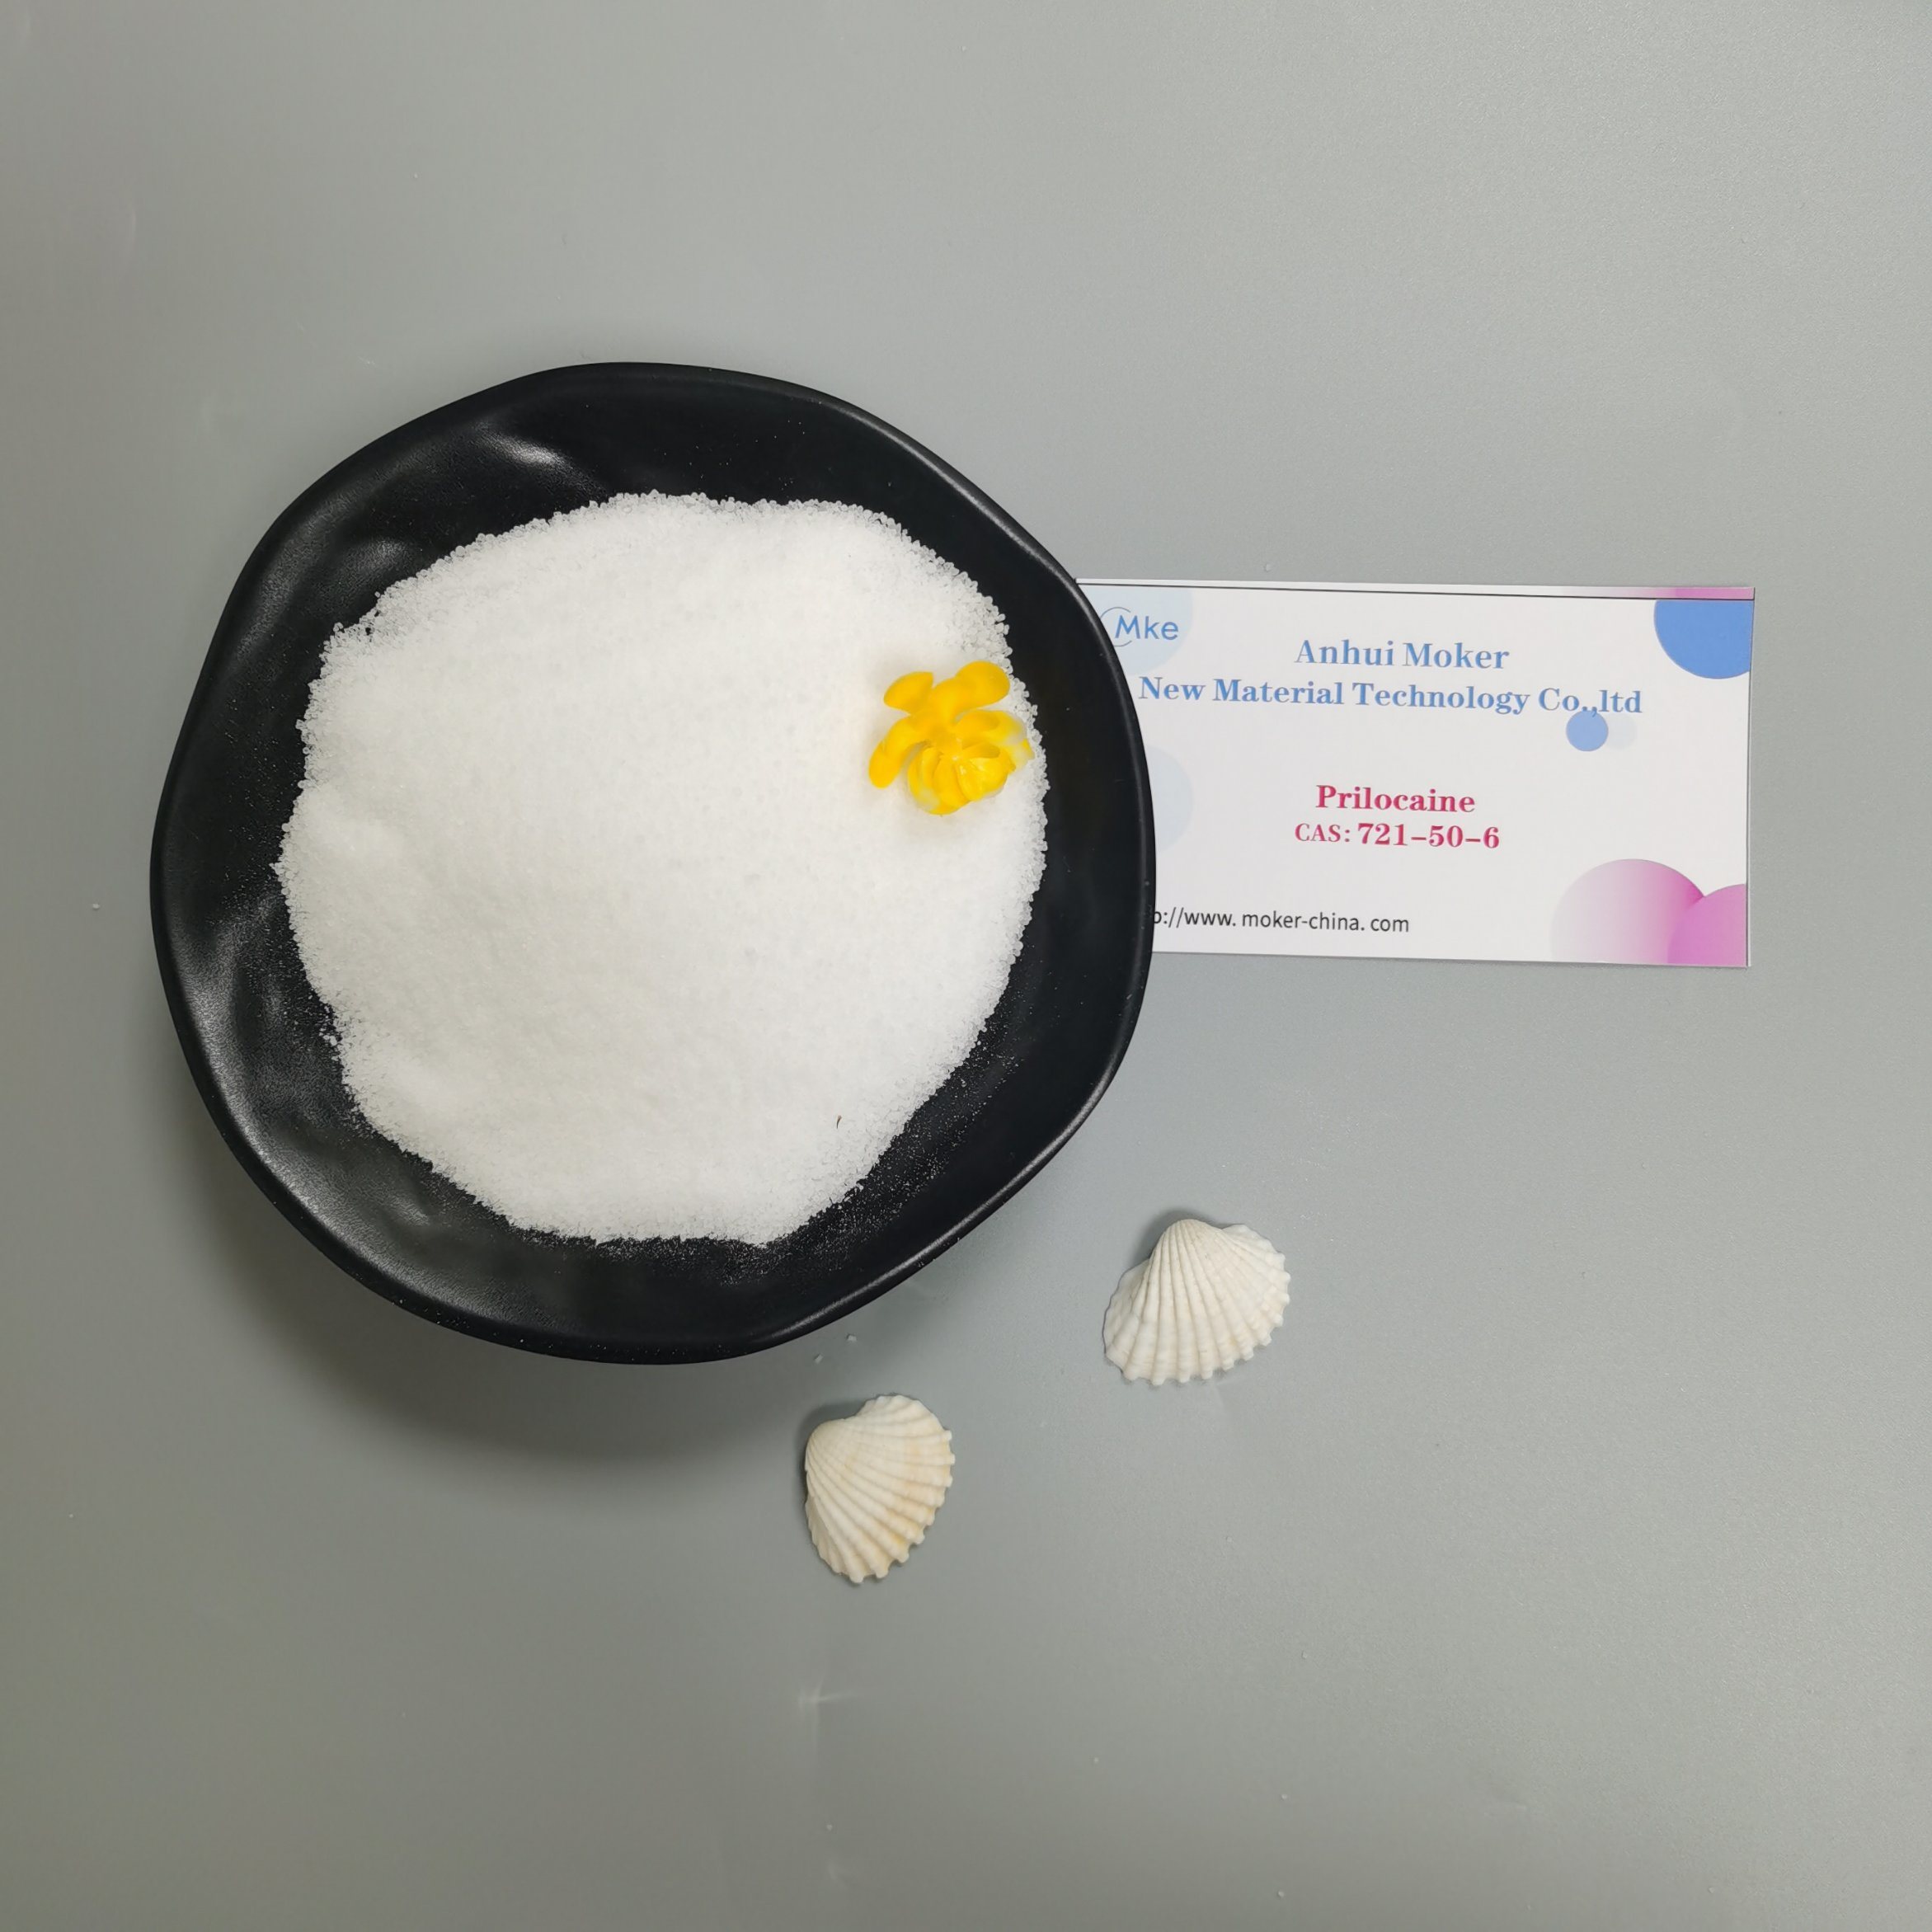 99% High Purity Prilocaine CAS 721-50-6 with Fast Delivery